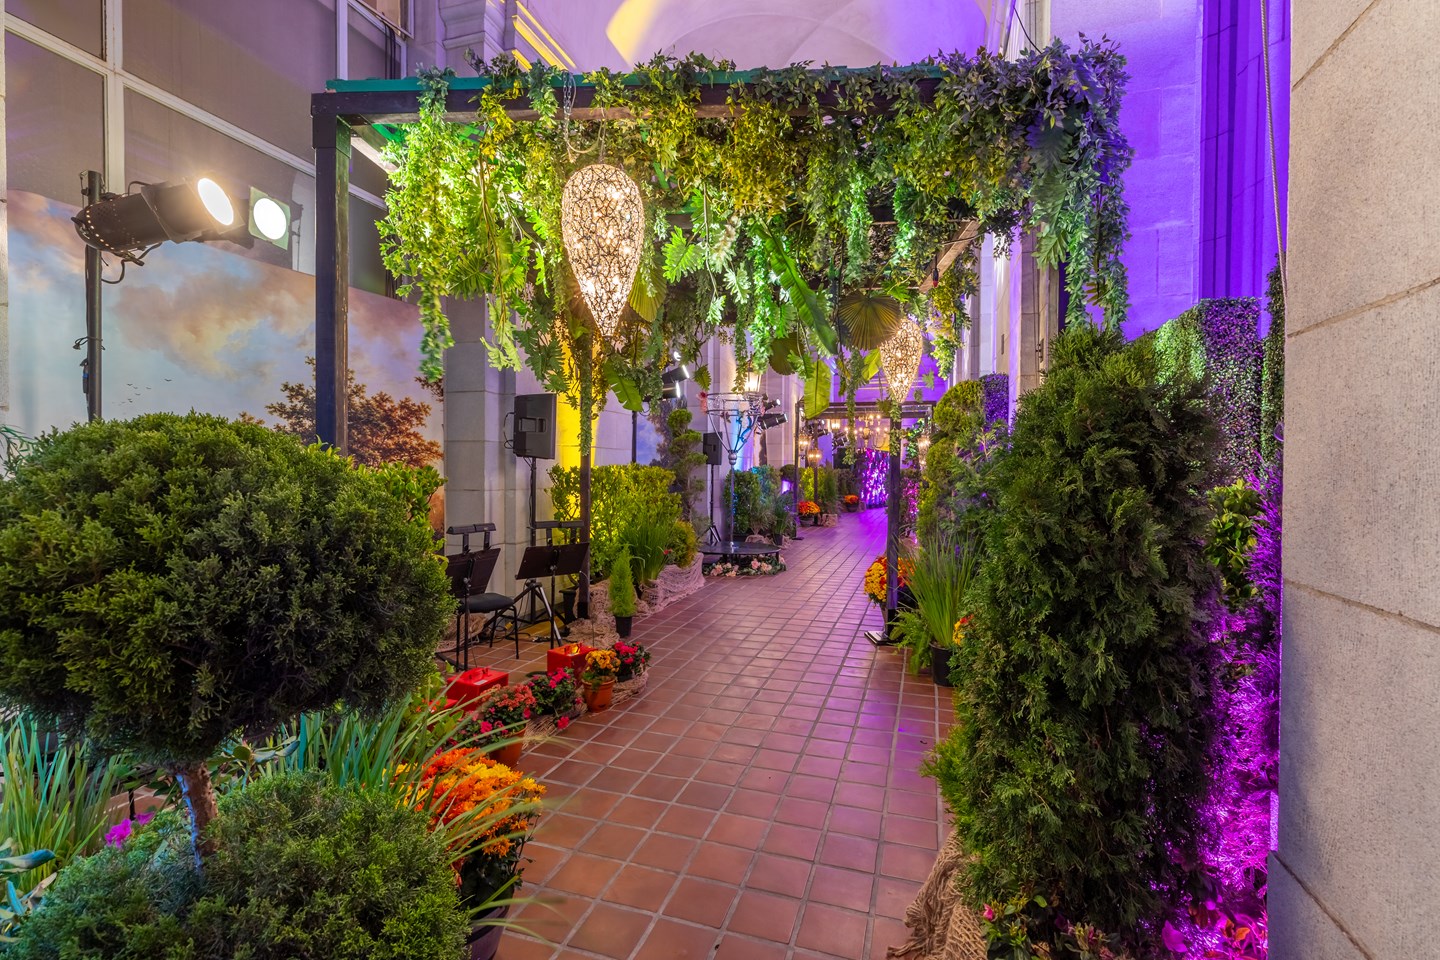 beautiful hallway decked out with plants, shrubs and flowers